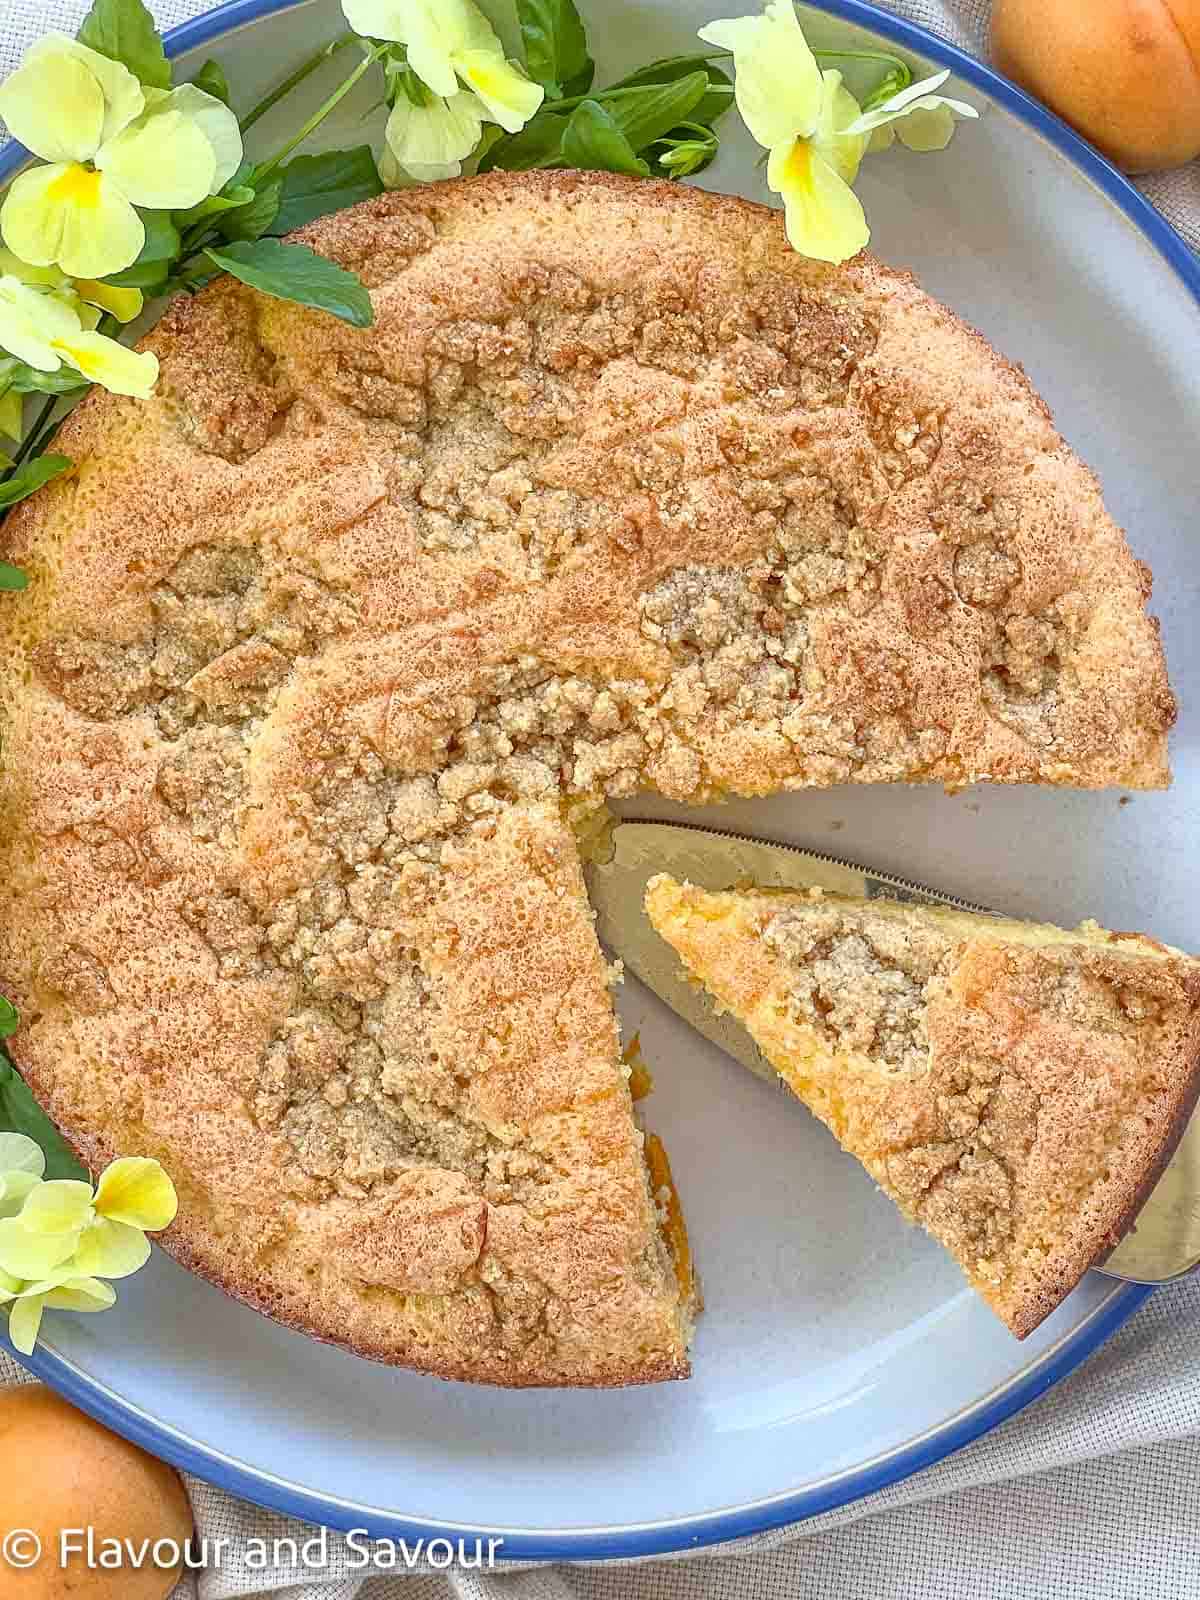 Overhead view of a flourless apricot almond cake with streusel topping.